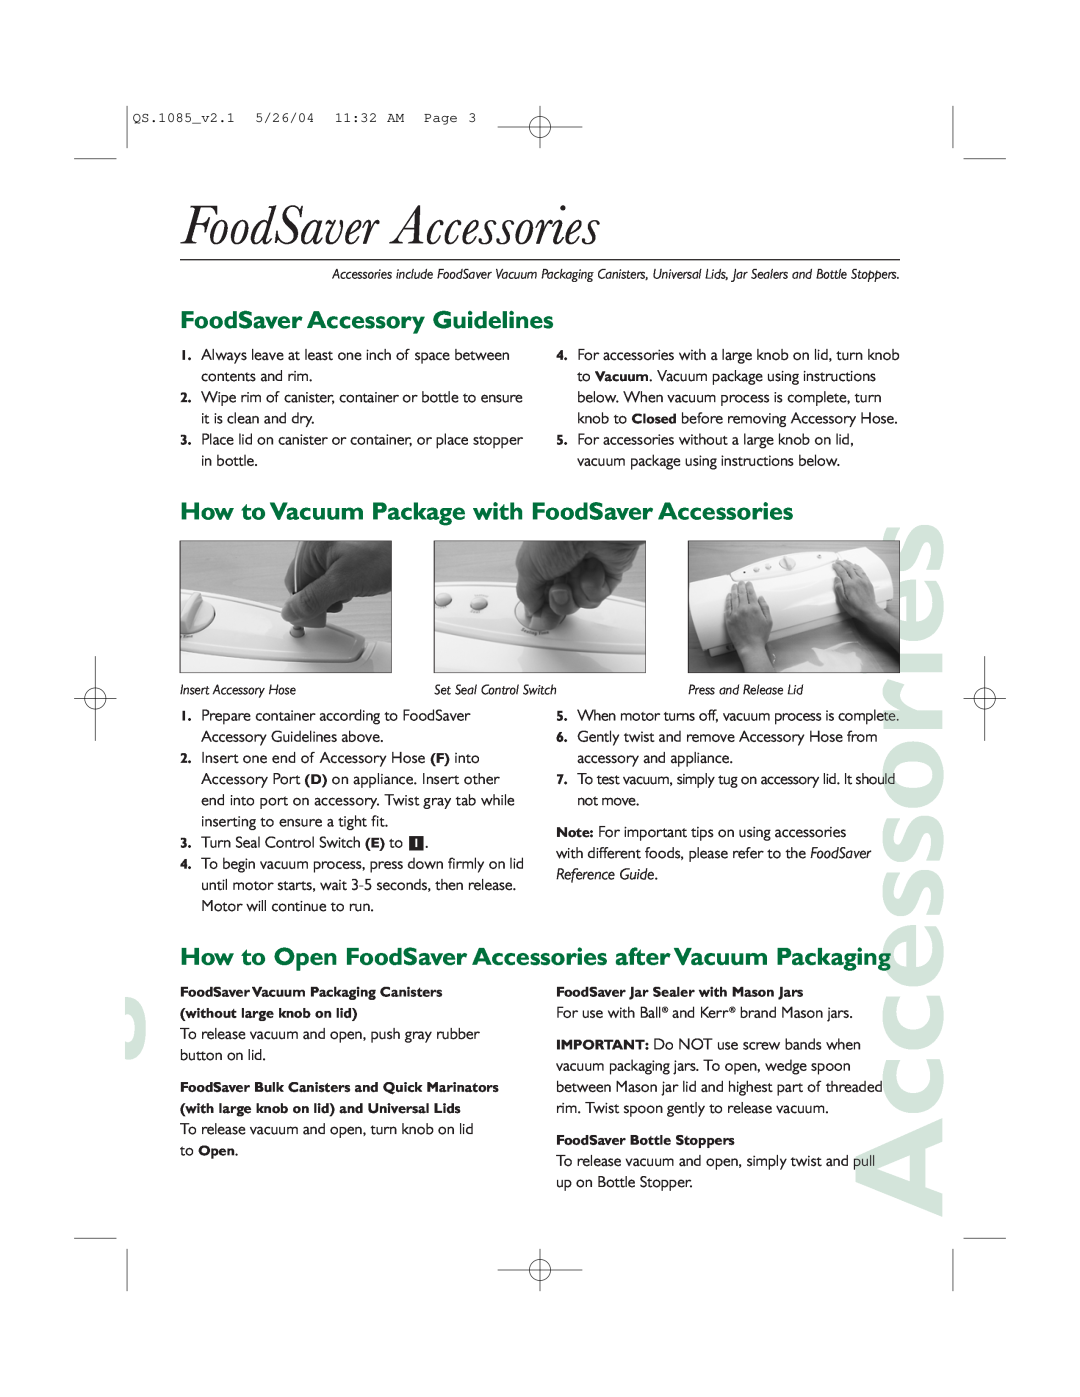 FoodSaver V1085 FoodSaver Accessory Guidelines, How to Vacuum Package with FoodSaver Accessories, Reference Guide 